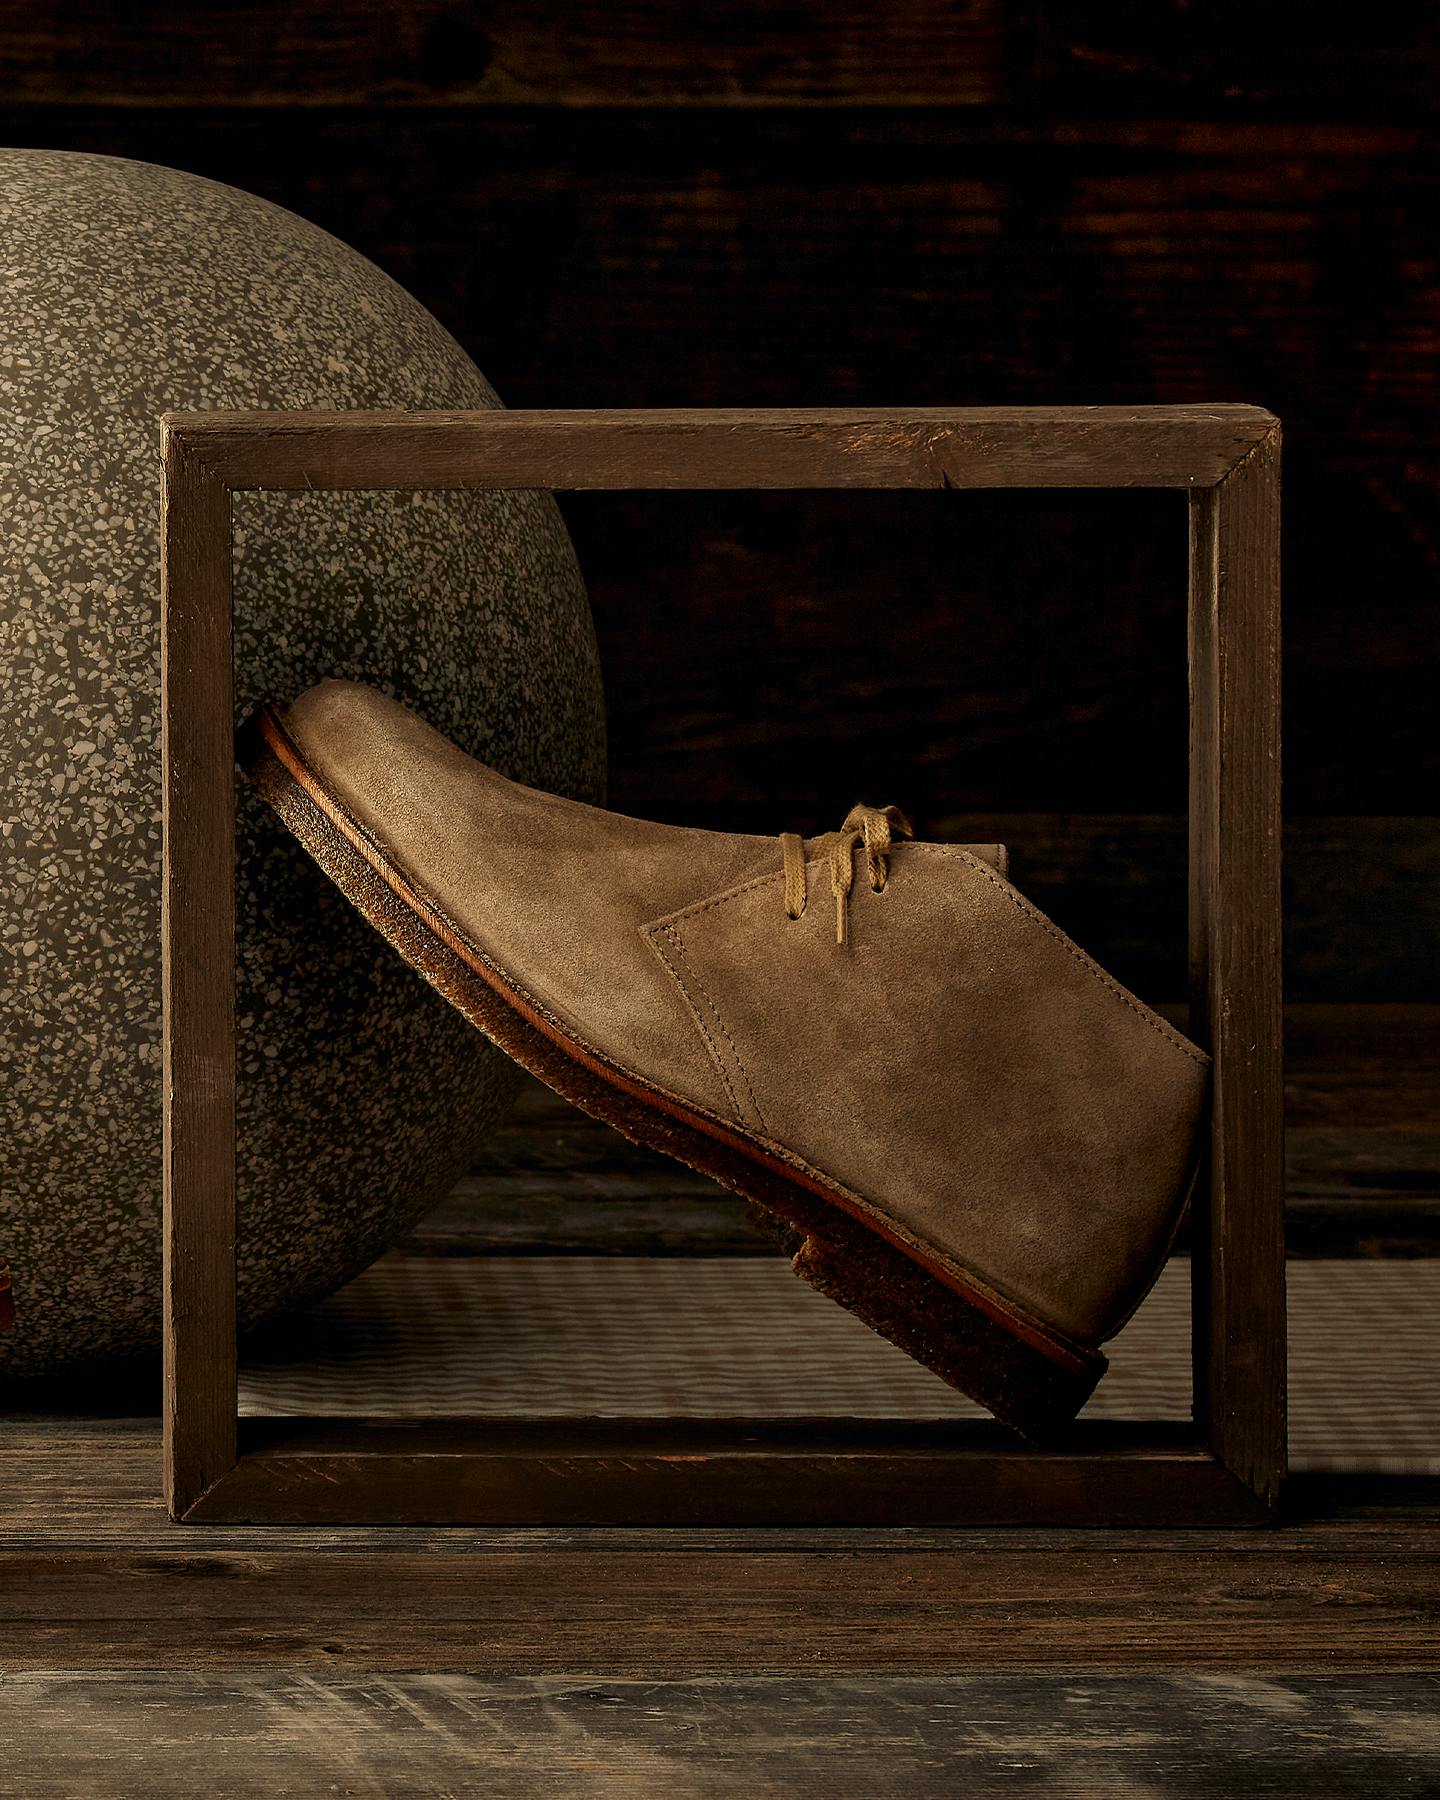 Artistic image of shoes with abstract objects